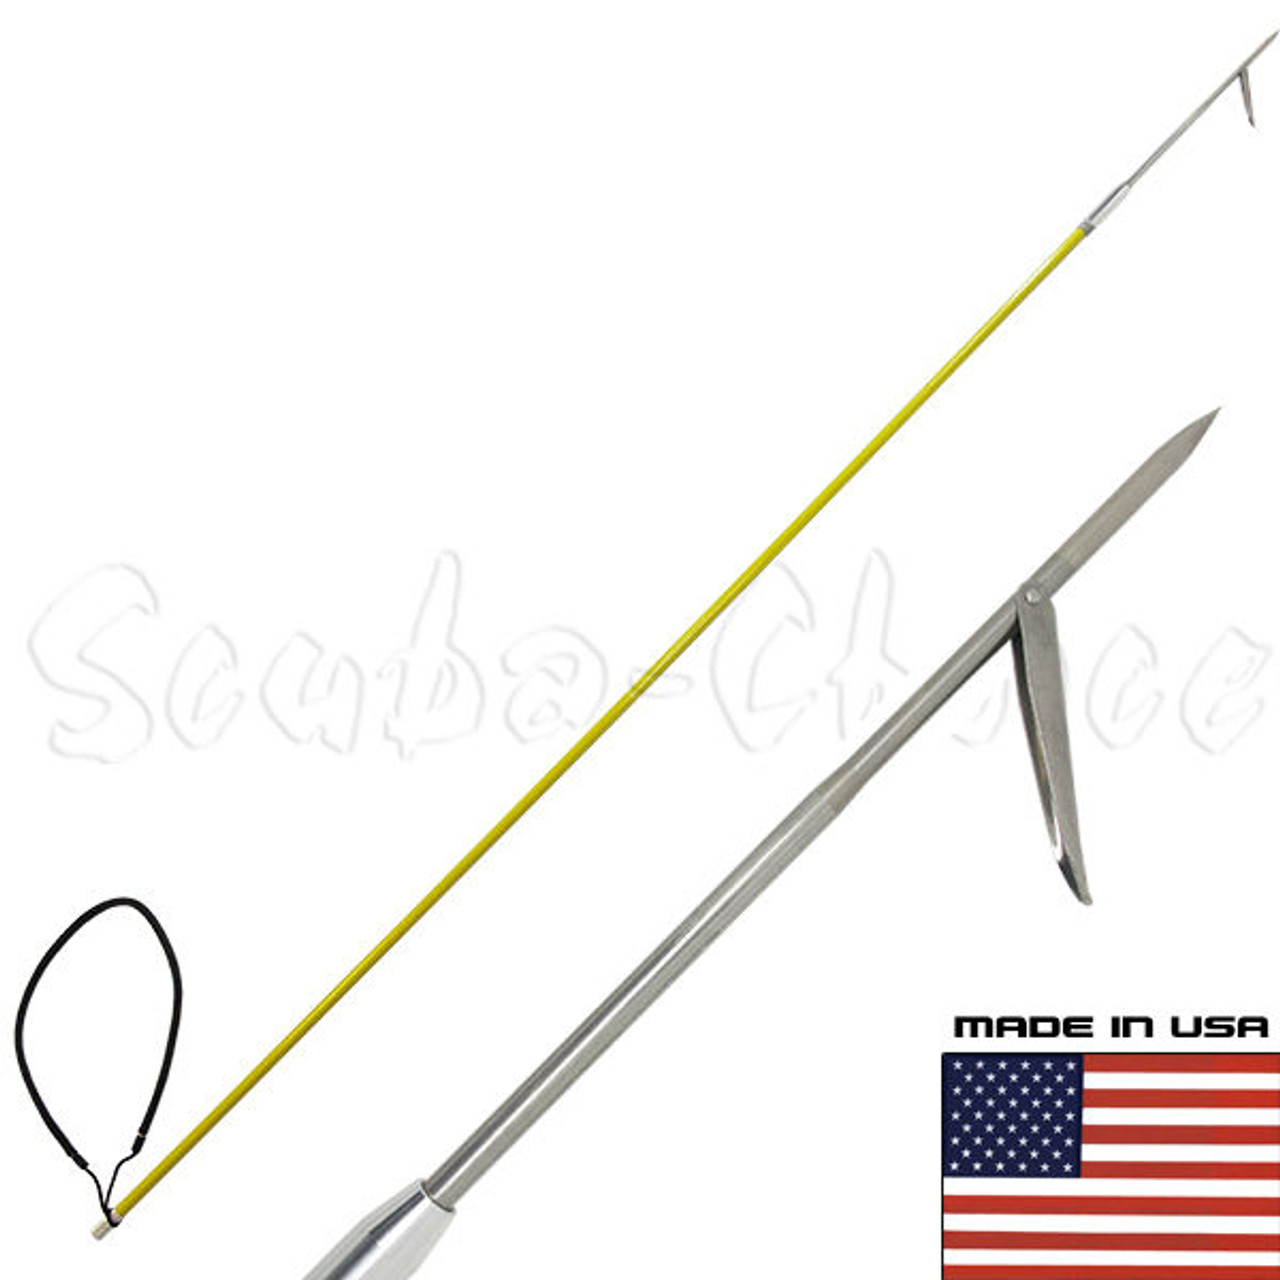 7' One Piece Spearfishing Fiber Glass Pole Spear w/ 1 Prong Single Barb Tip  - scubachoice